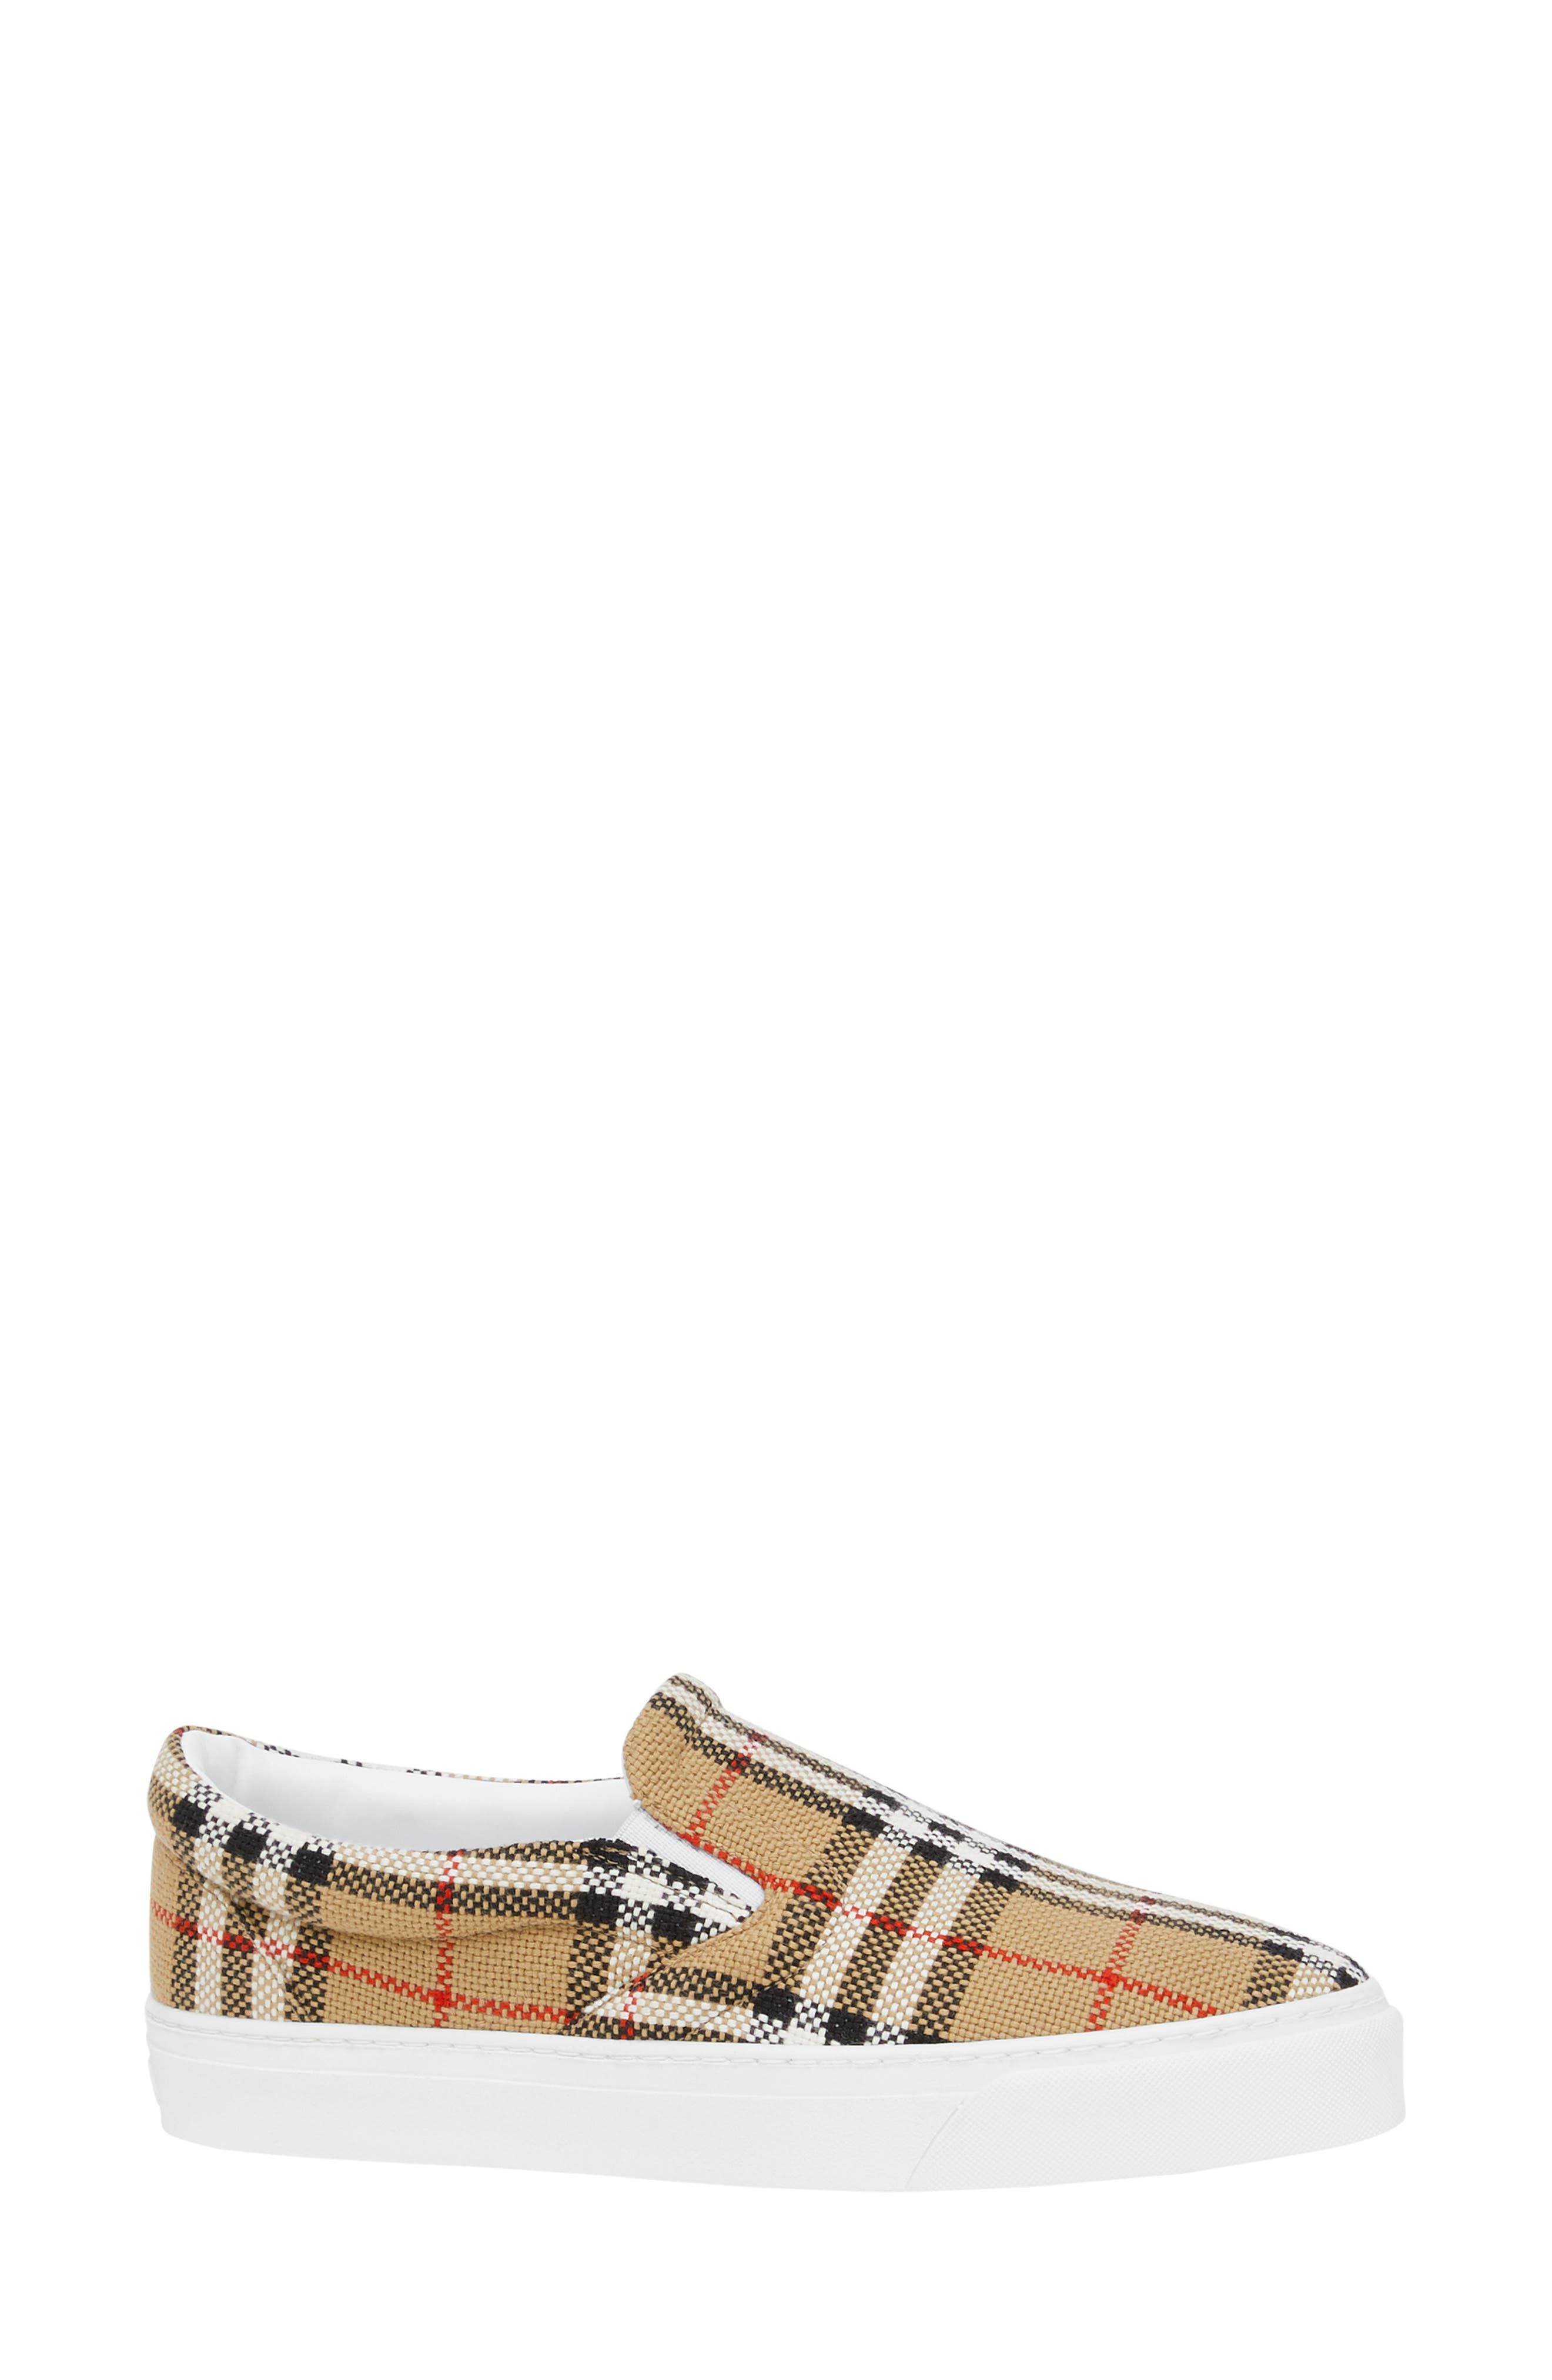 burberry shoes slip on